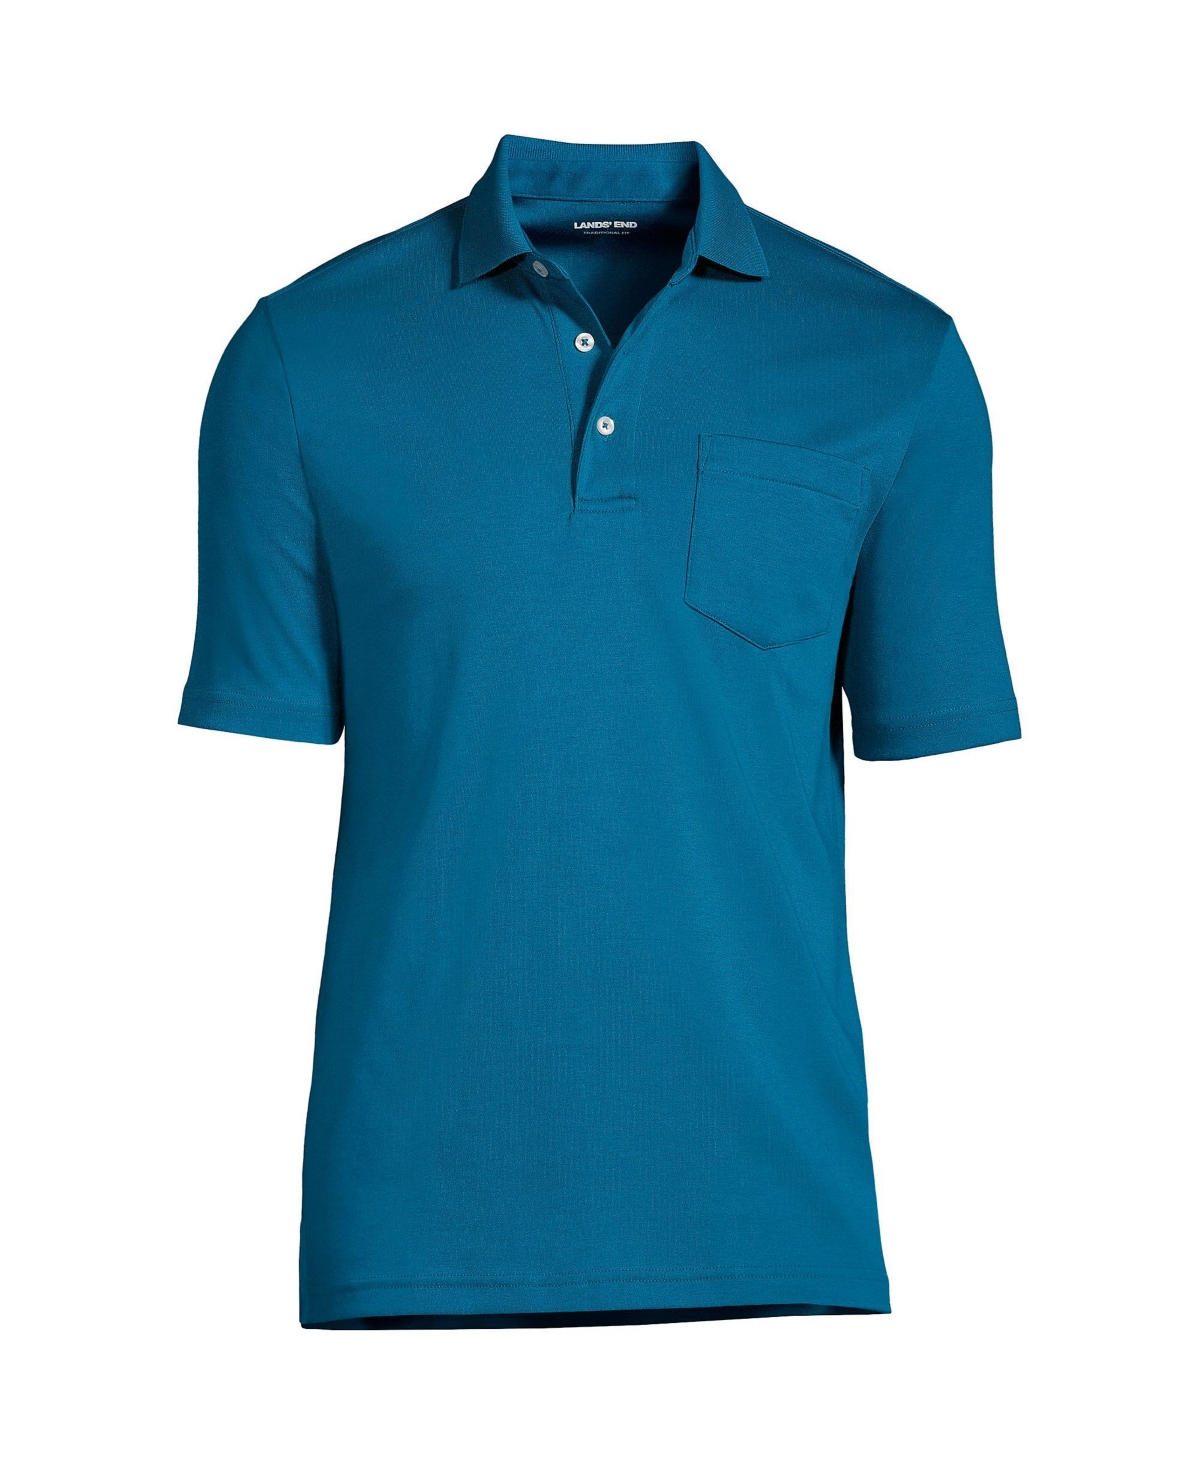 Men's Tall Short Sleeve Super Soft Supima Polo Shirt with Pocket - Baltic teal